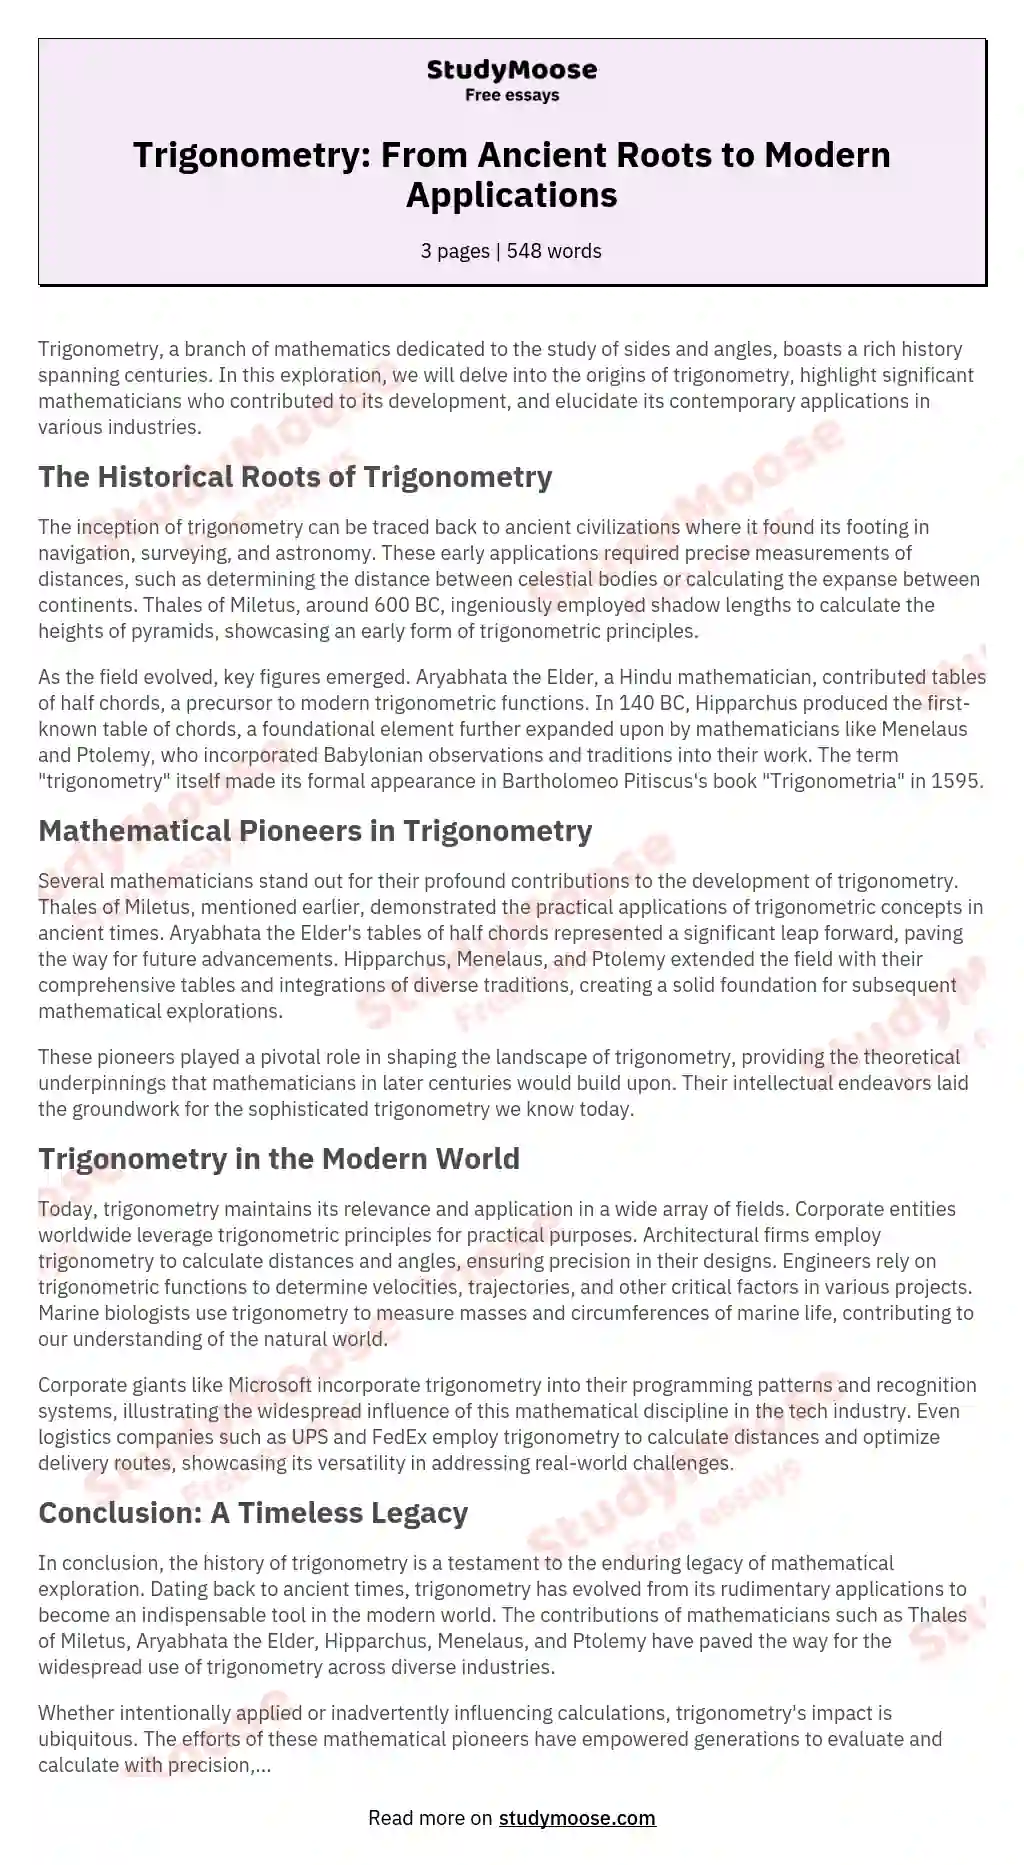 Trigonometry: From Ancient Roots to Modern Applications essay